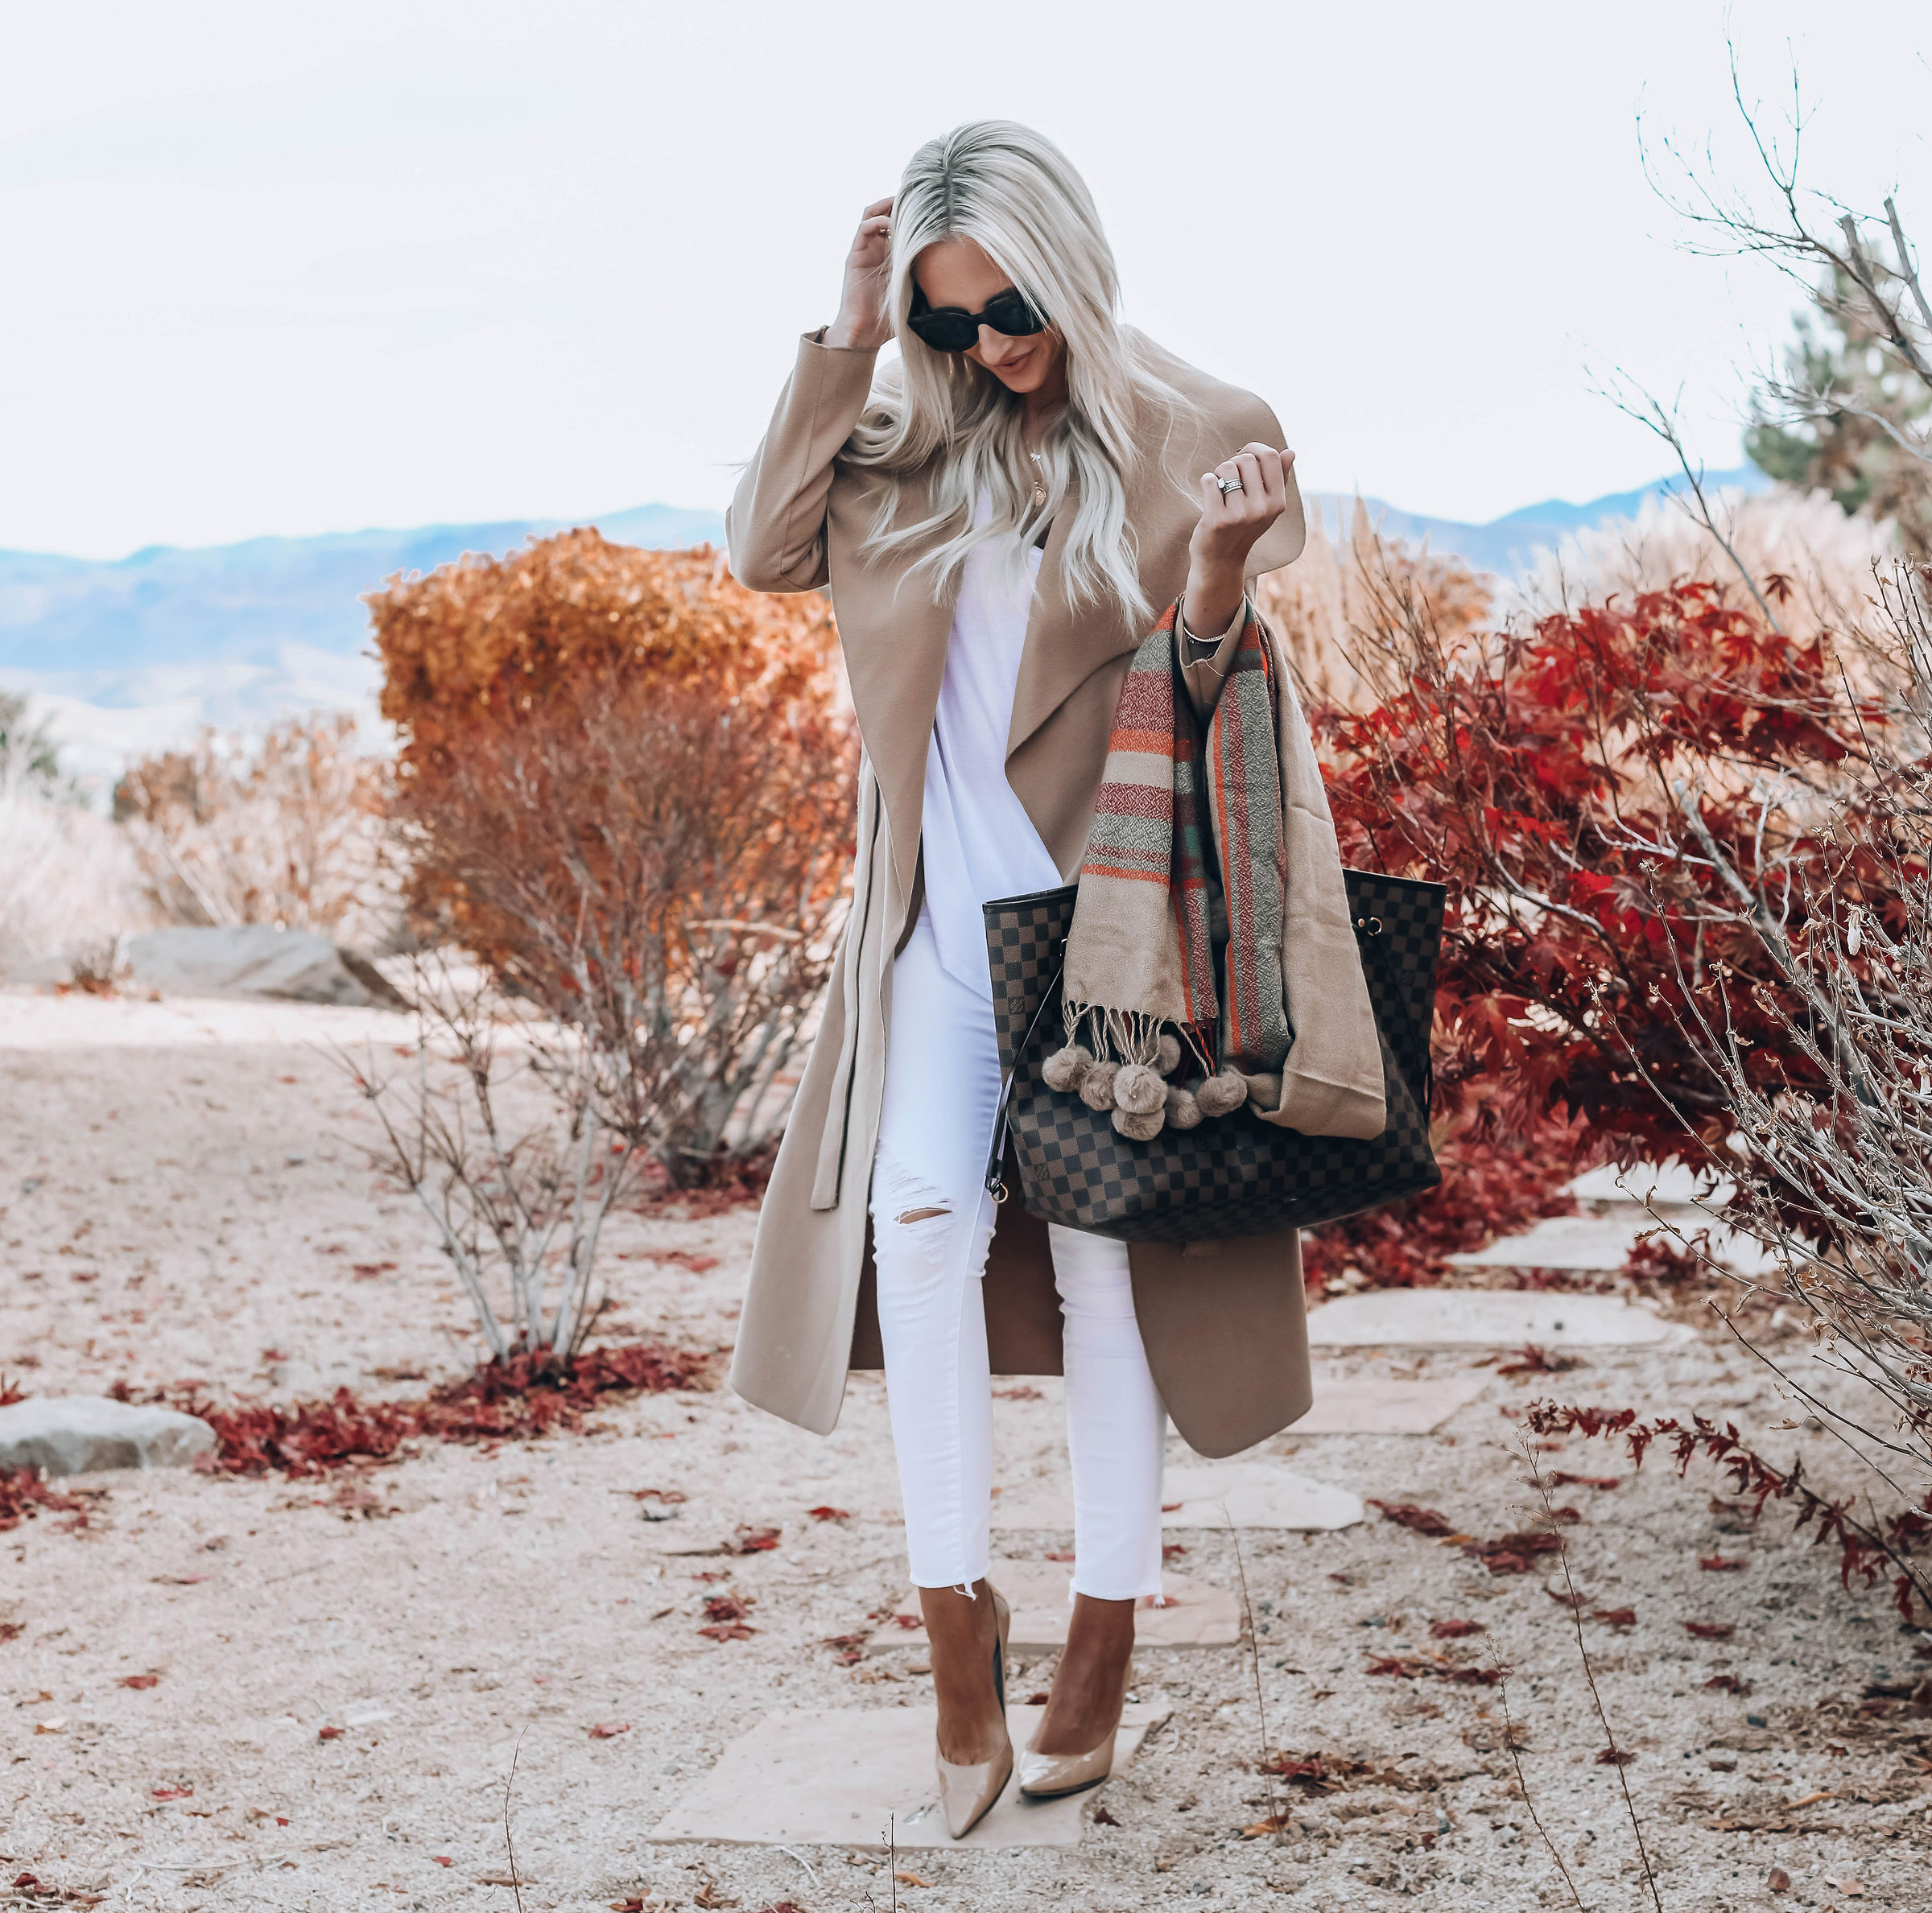 Reno Blogger, Emily Farren Wieczorek shares her secret weapon for fall and winter - this $50 marked down to $20 Classic Camel Coat from Boohoo